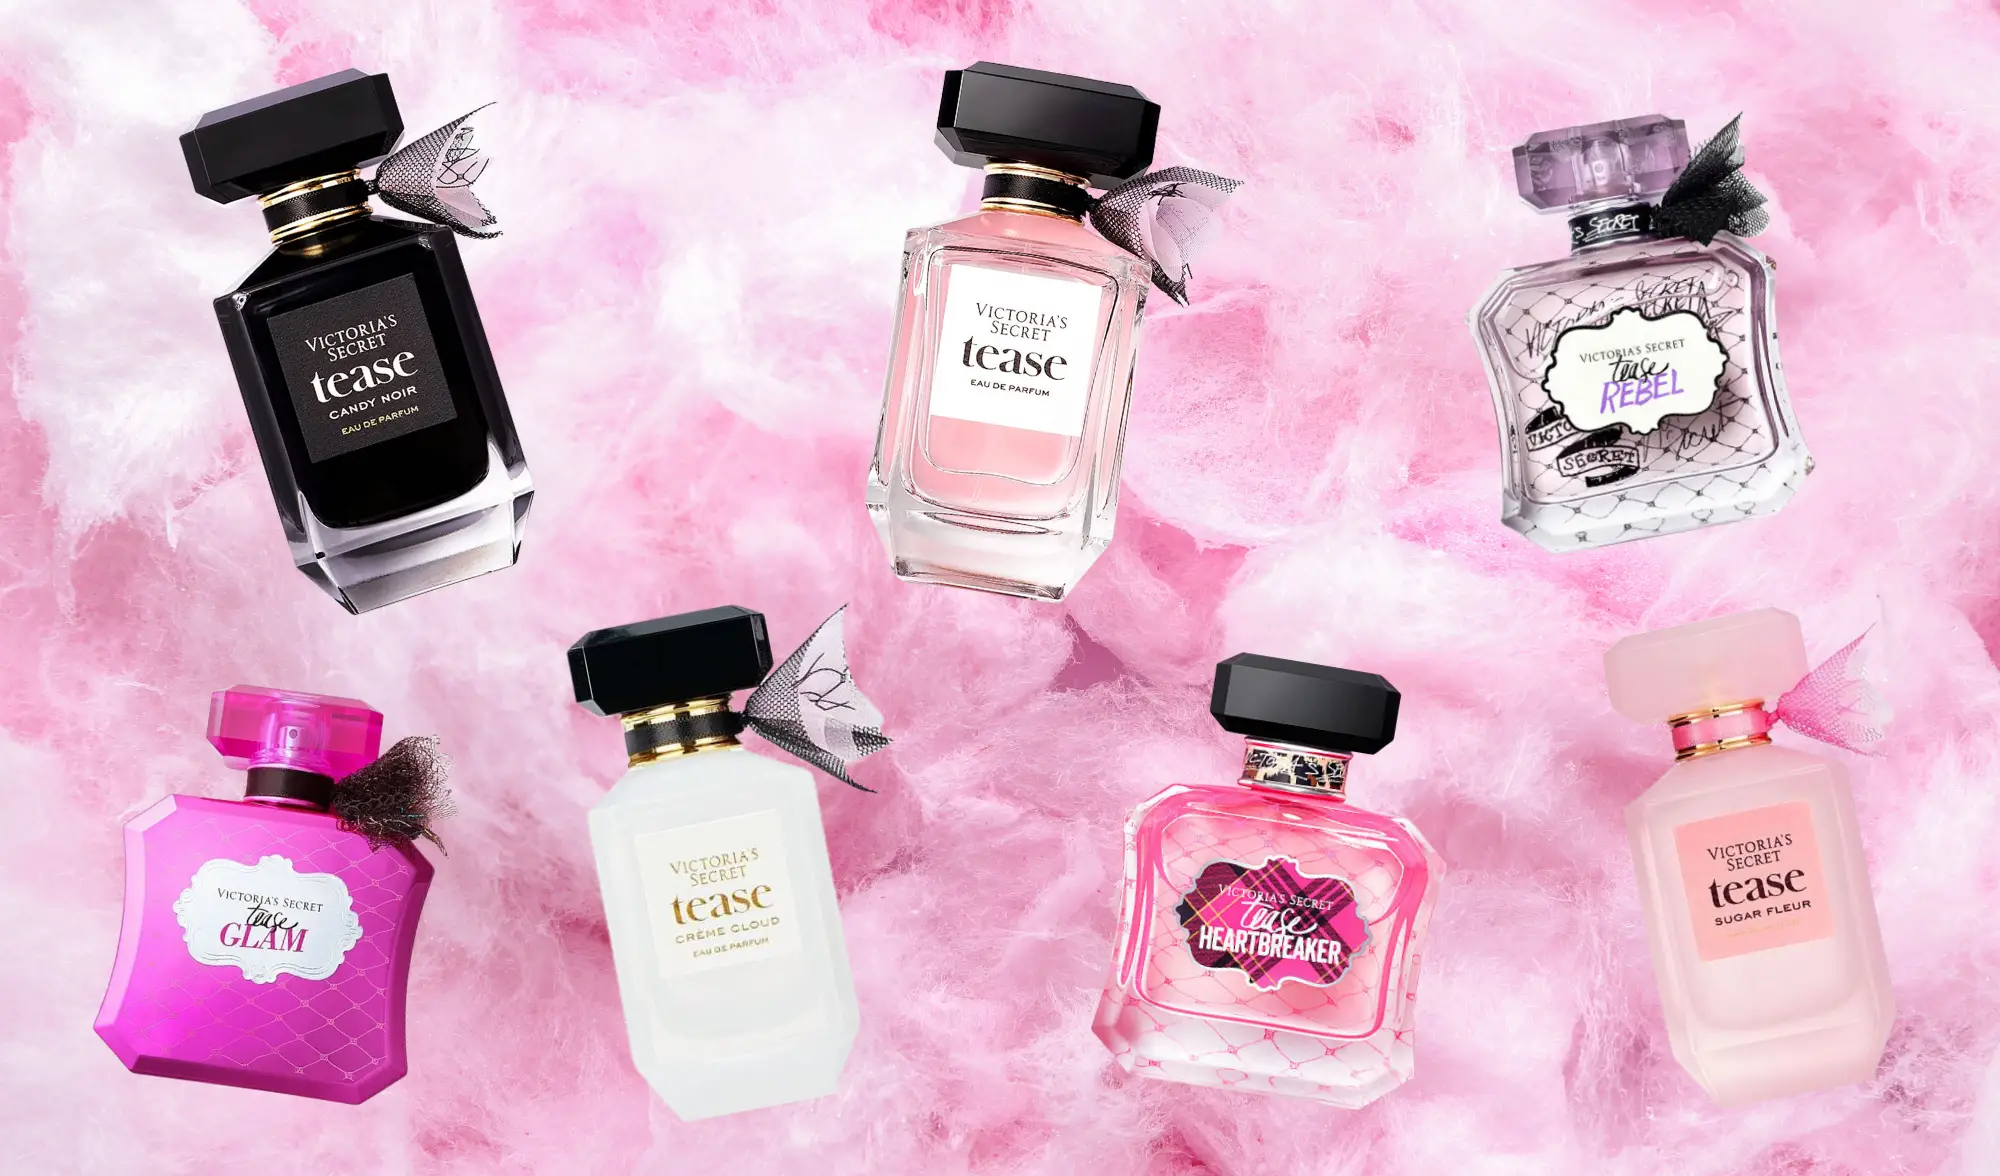 The Ultimate Guide To The Victoria's Secret Tease Perfumes